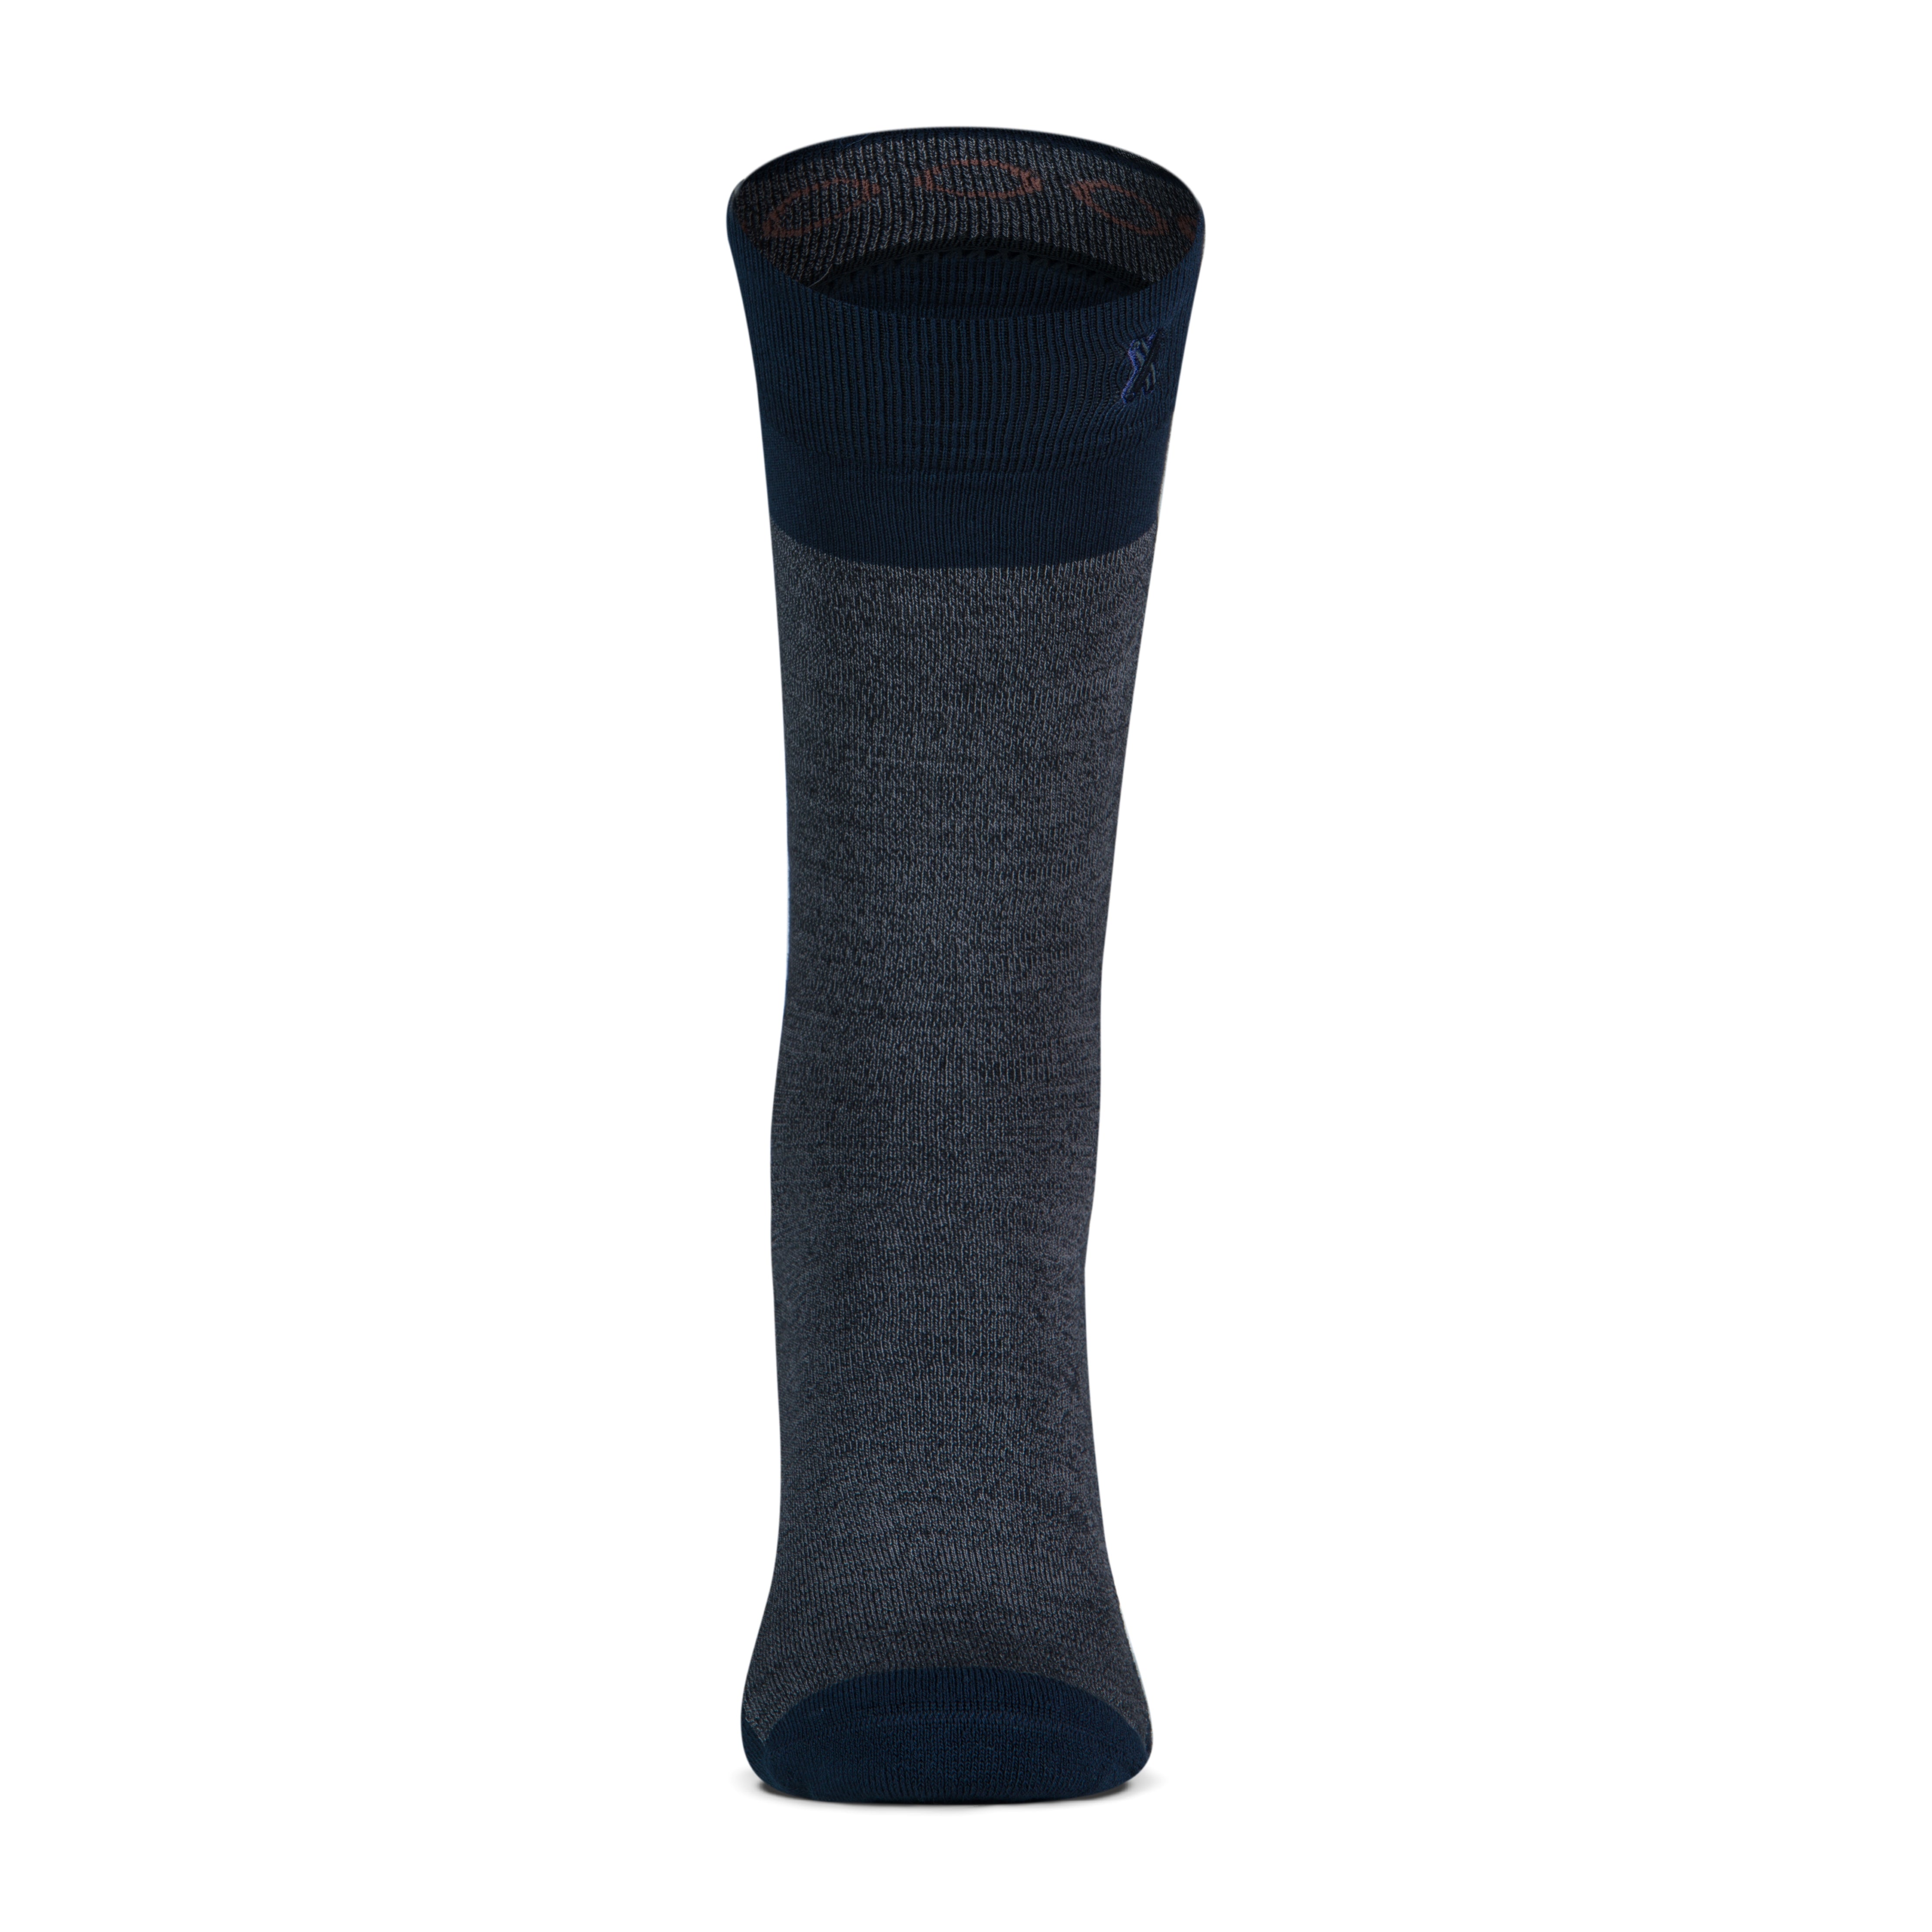 New York chaussettes pour hommes Anthracite